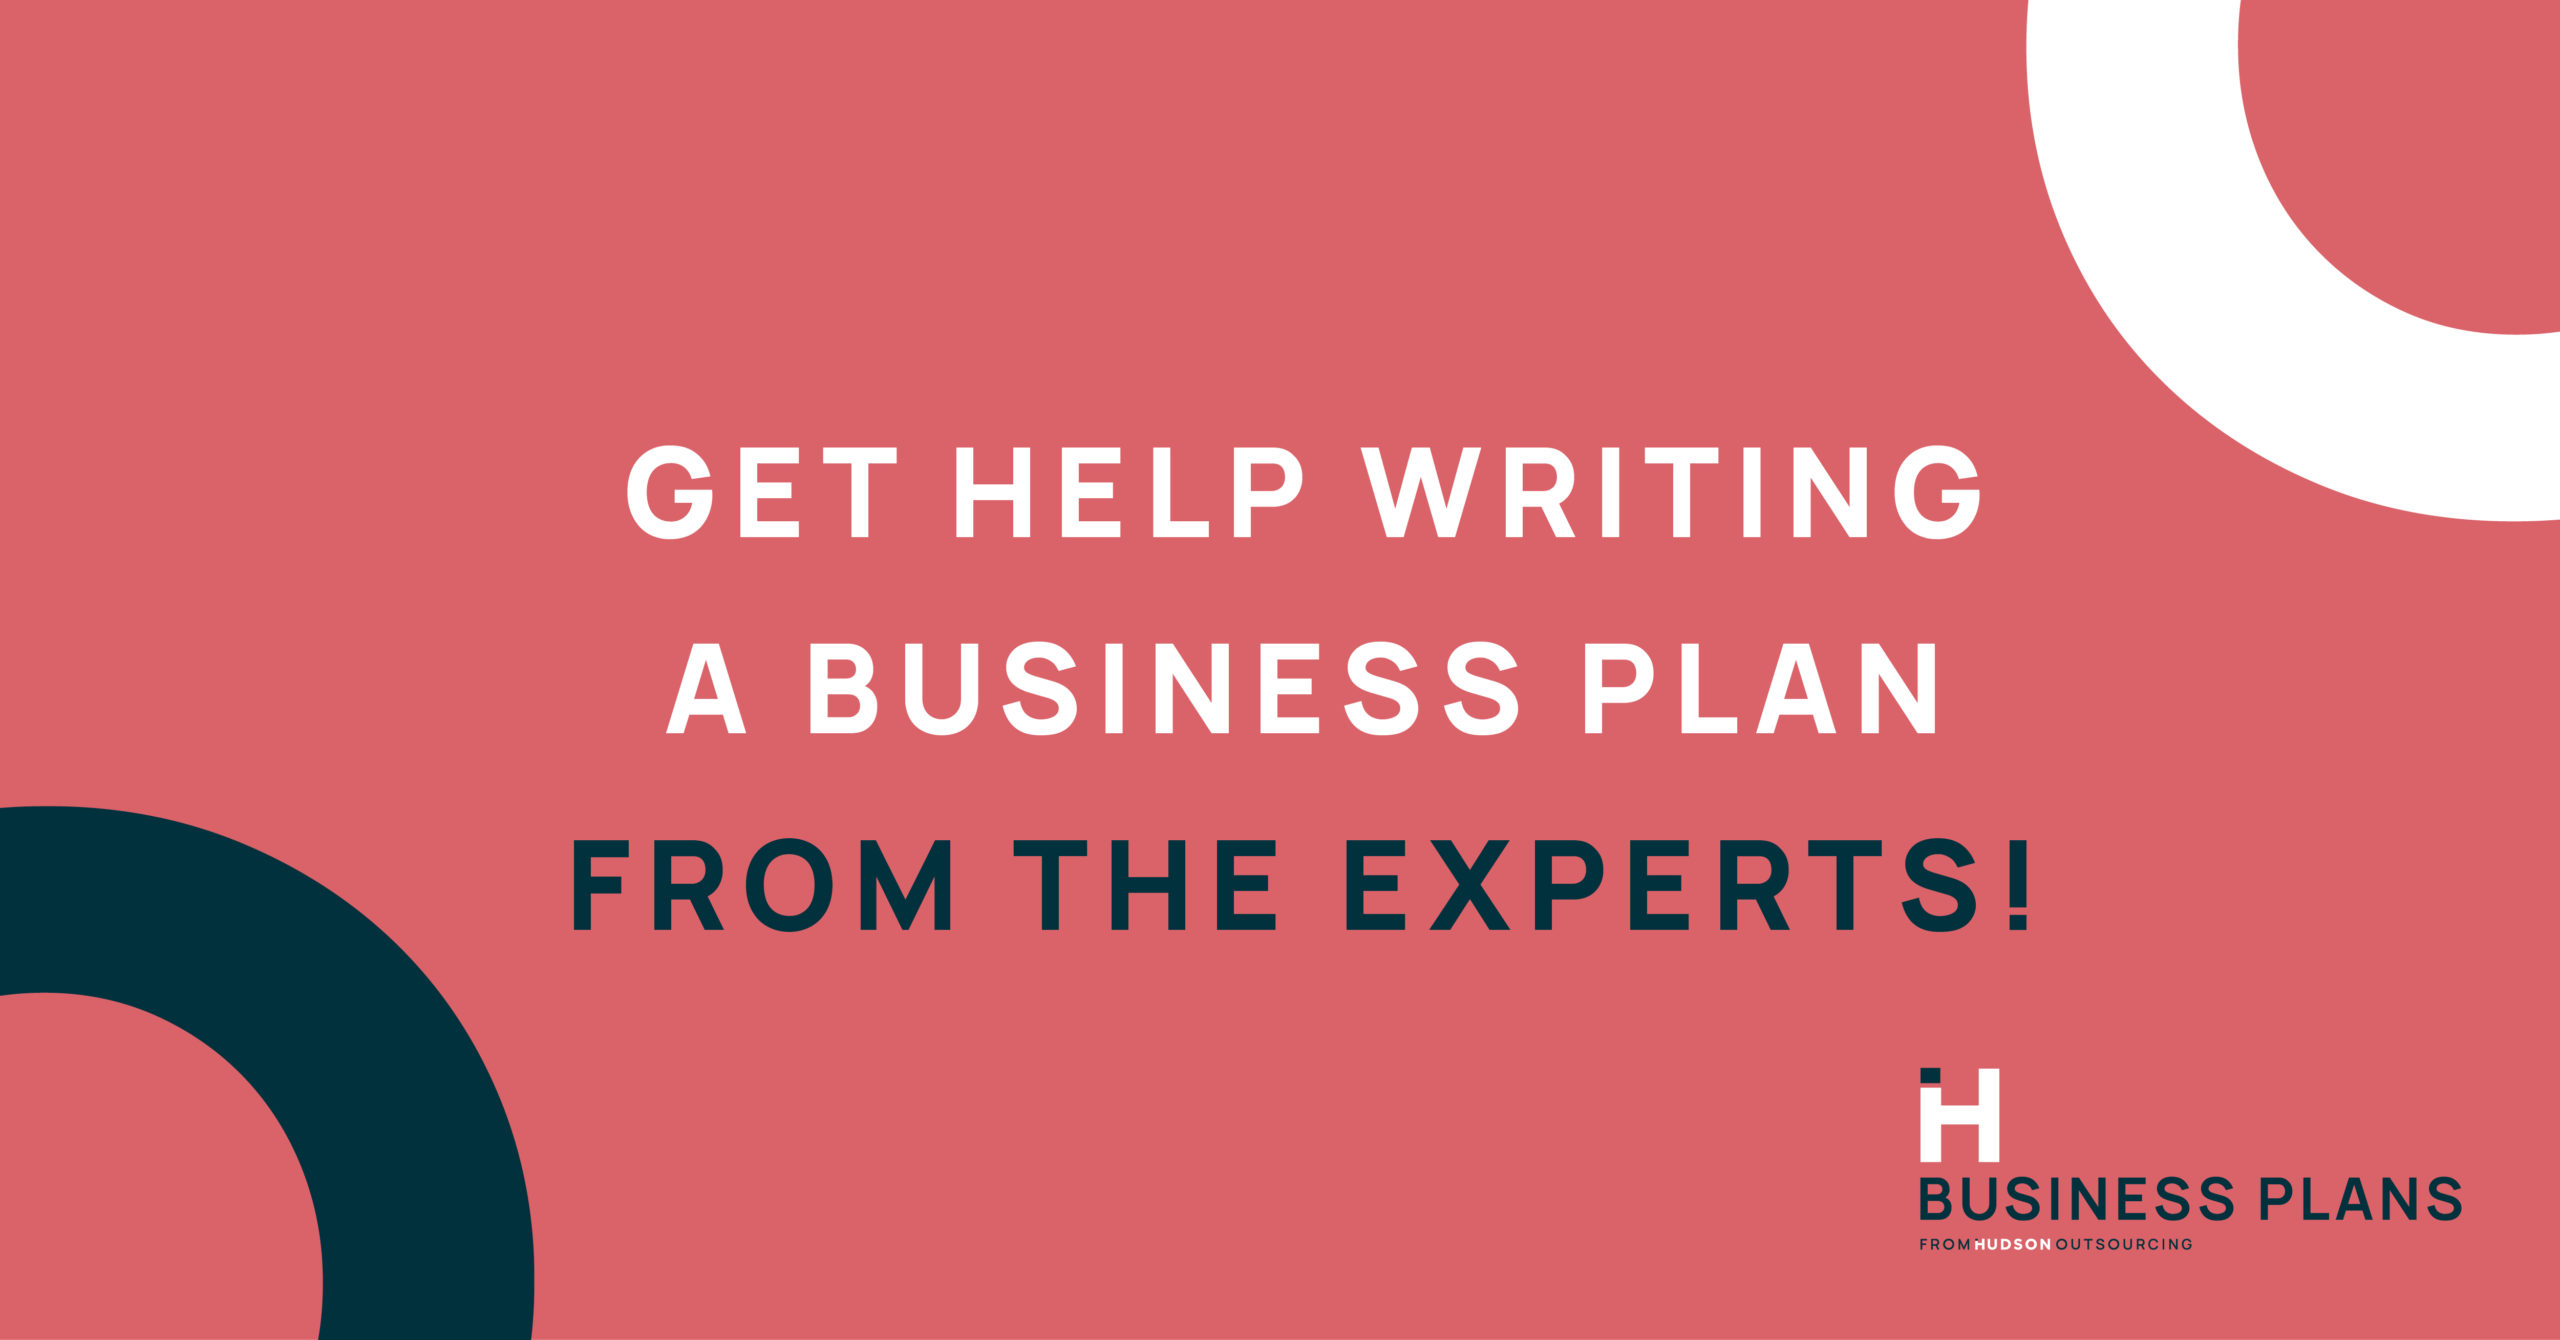 Get Help Writing a Business Plan from the Experts!